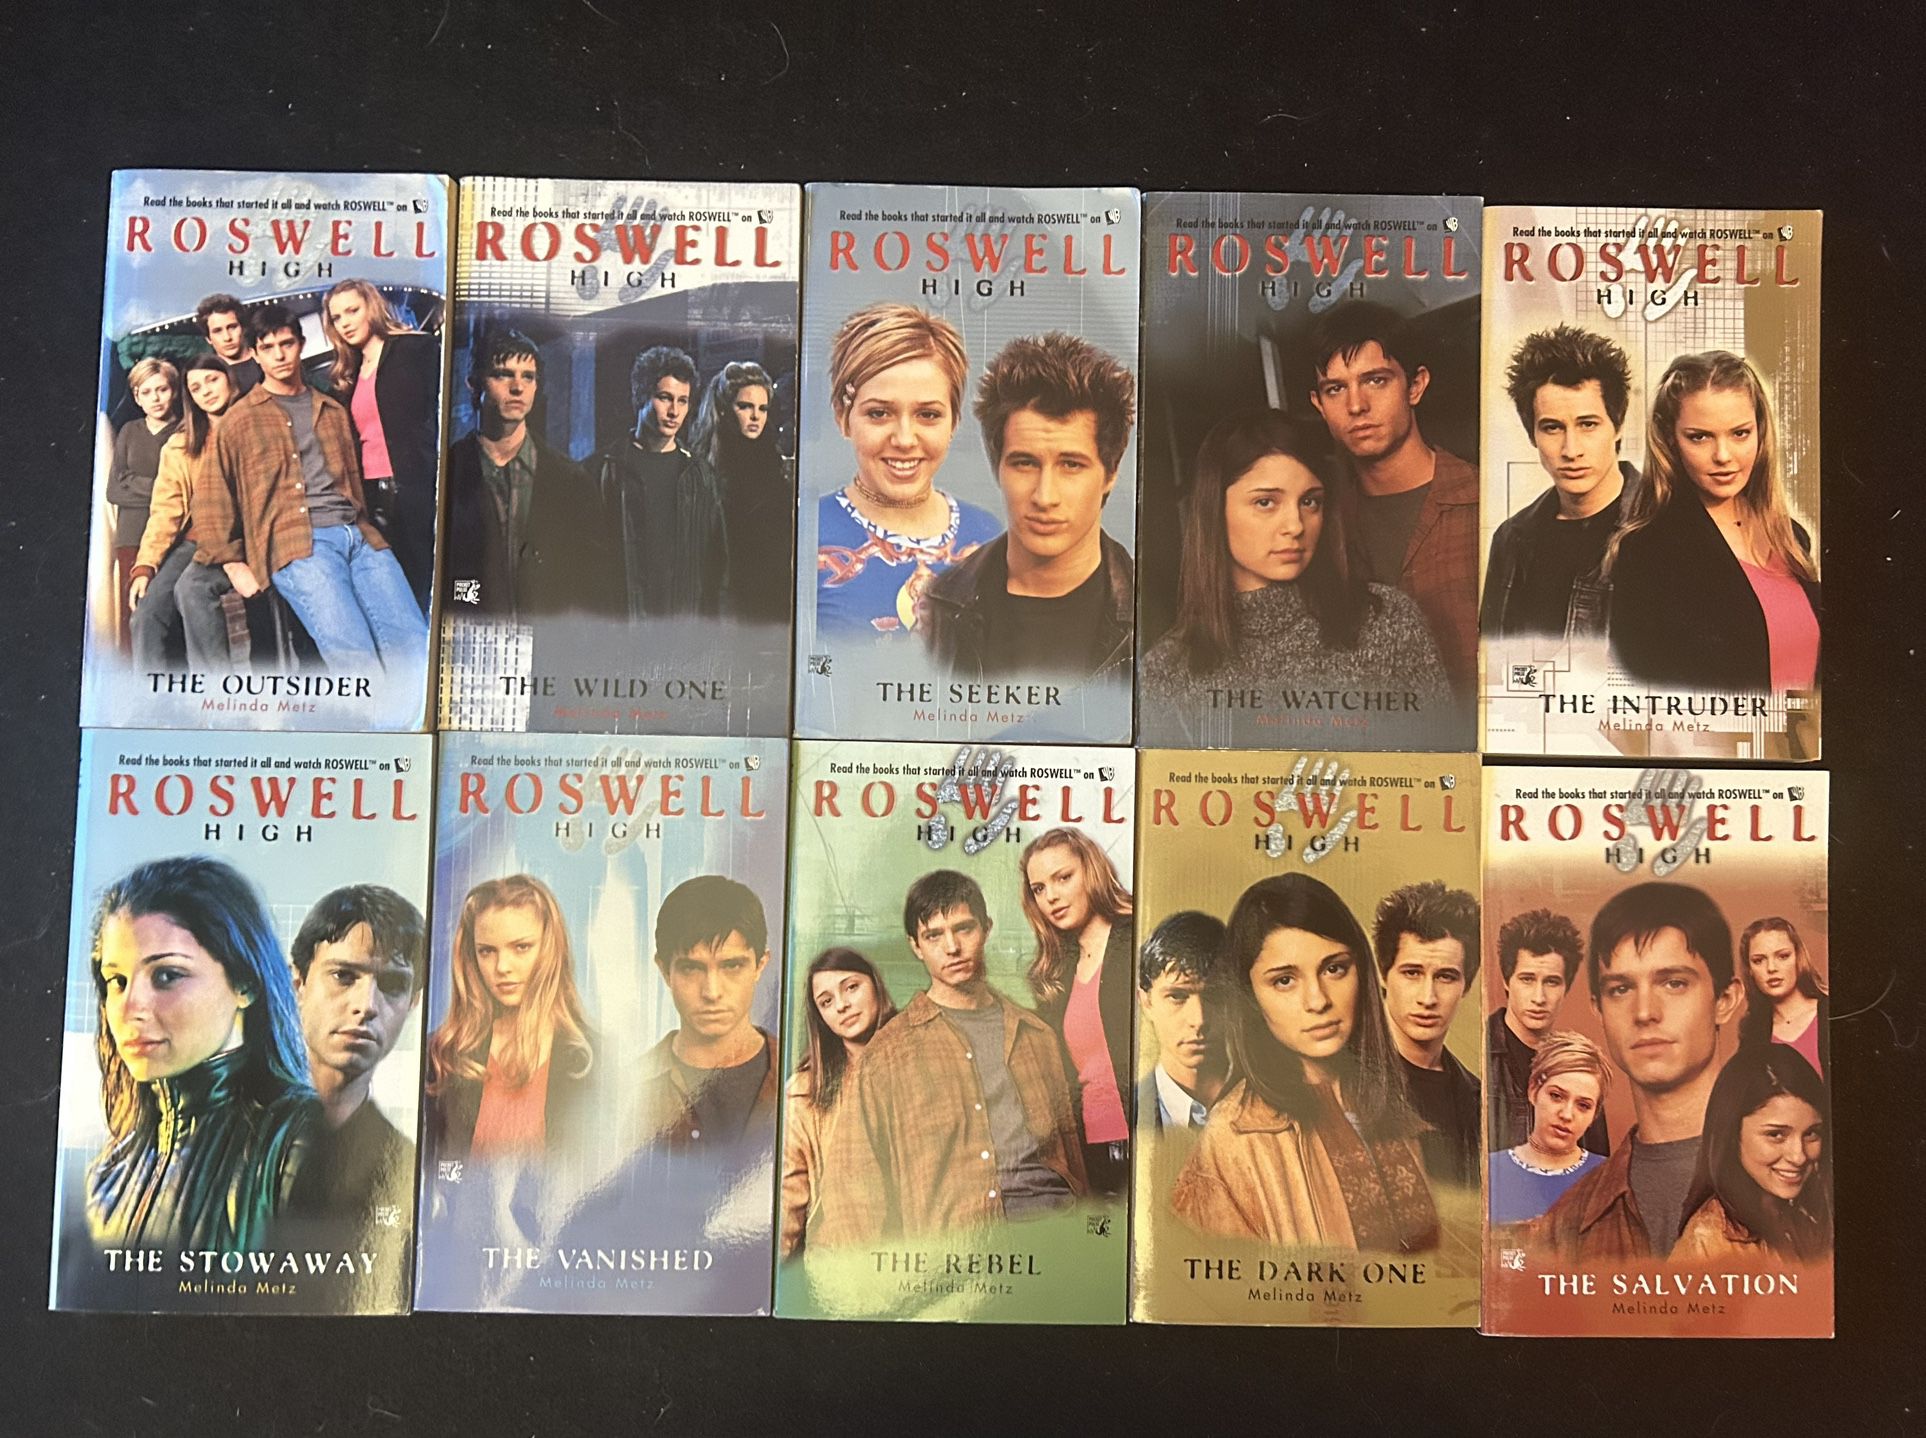 Roswell Book Series